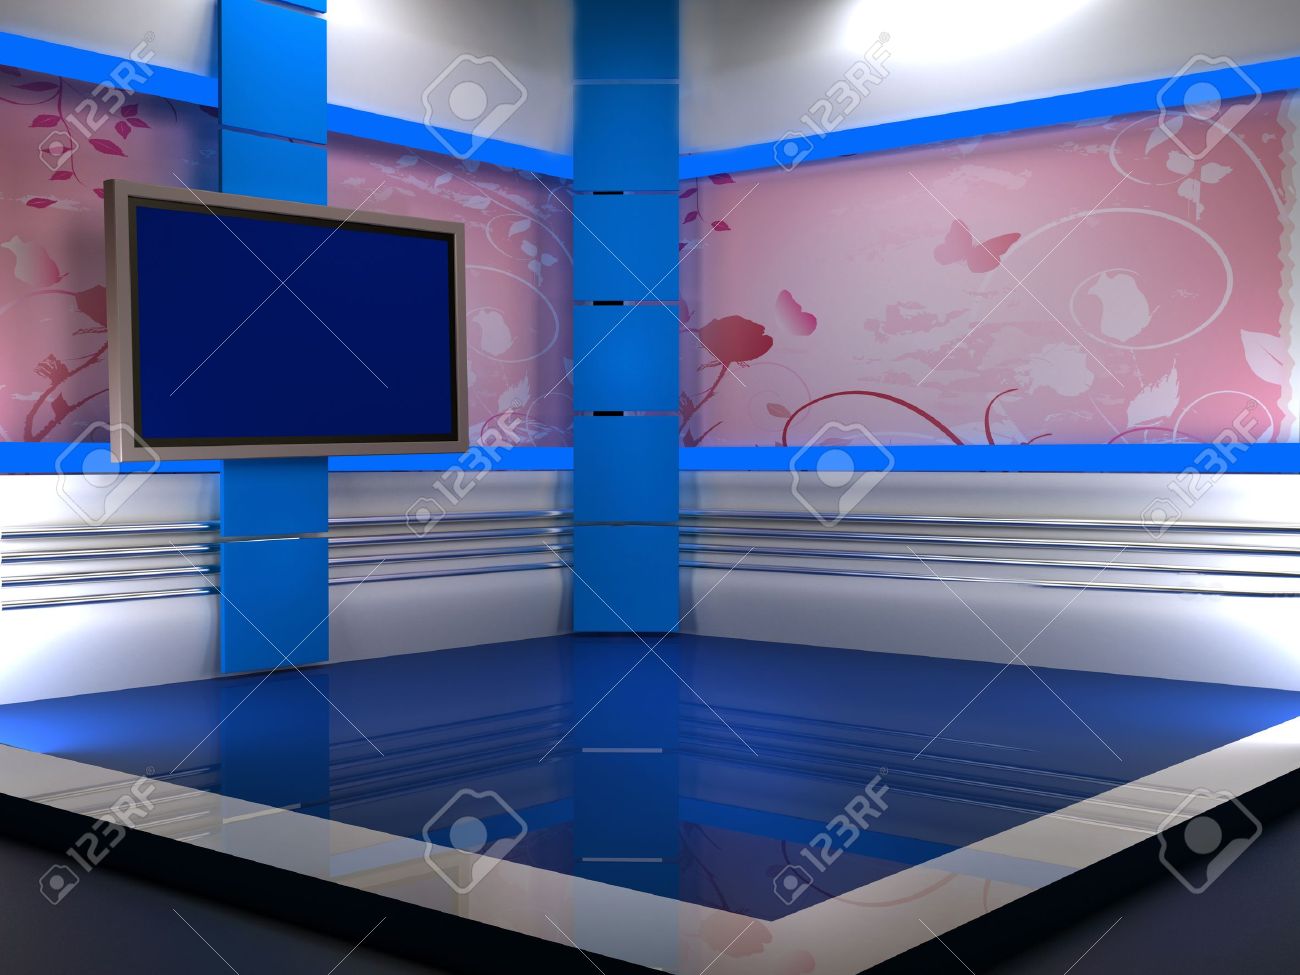 Background Studio For Tv Chroma Stock Photo Picture And Royalty